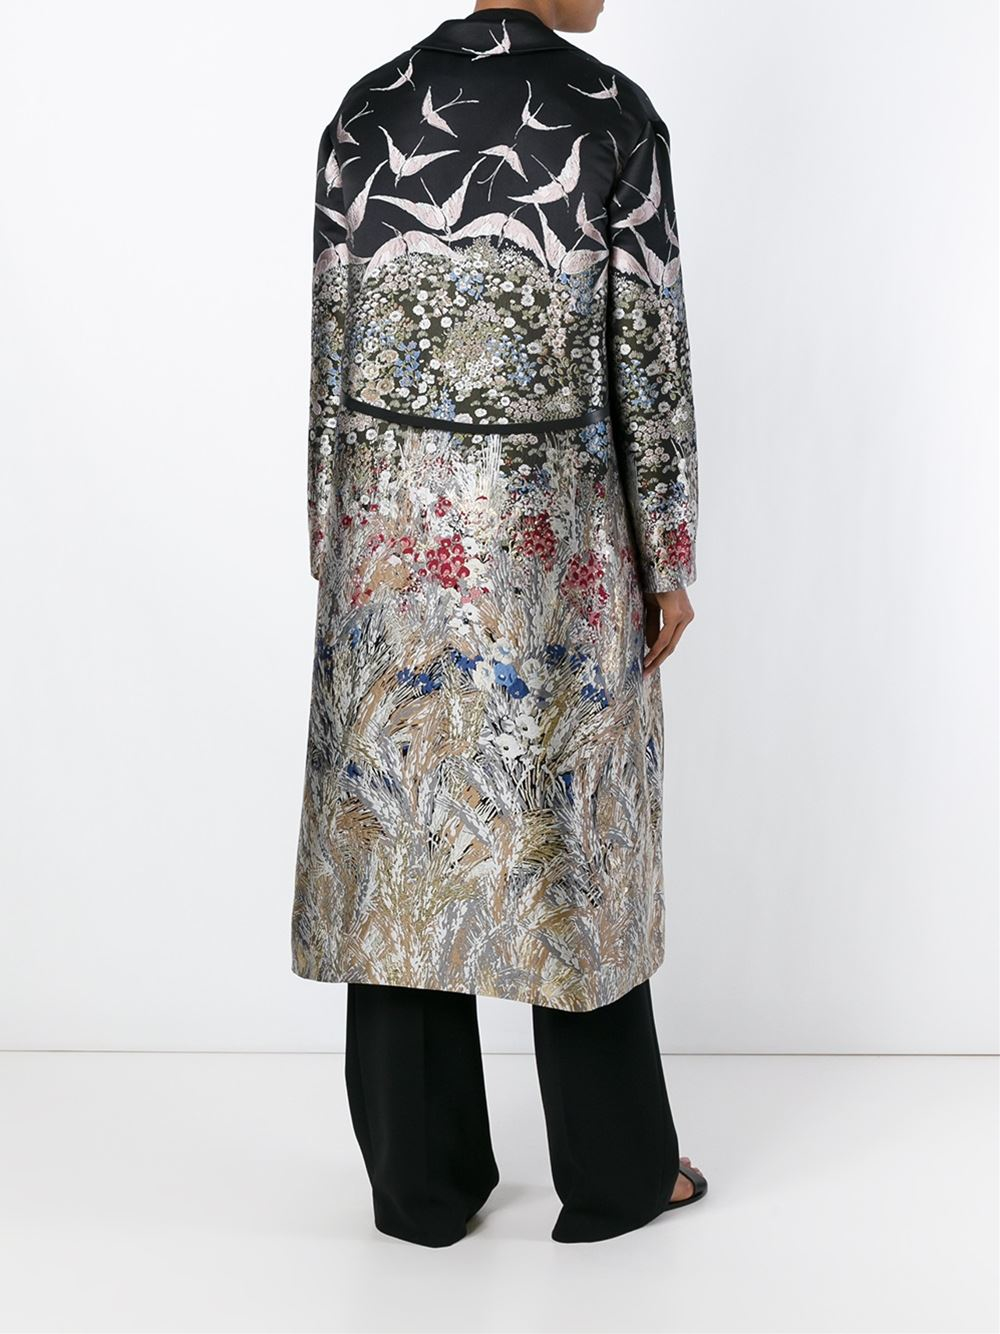 Lyst - Valentino Floral And Bird Jacquard Coat in Black